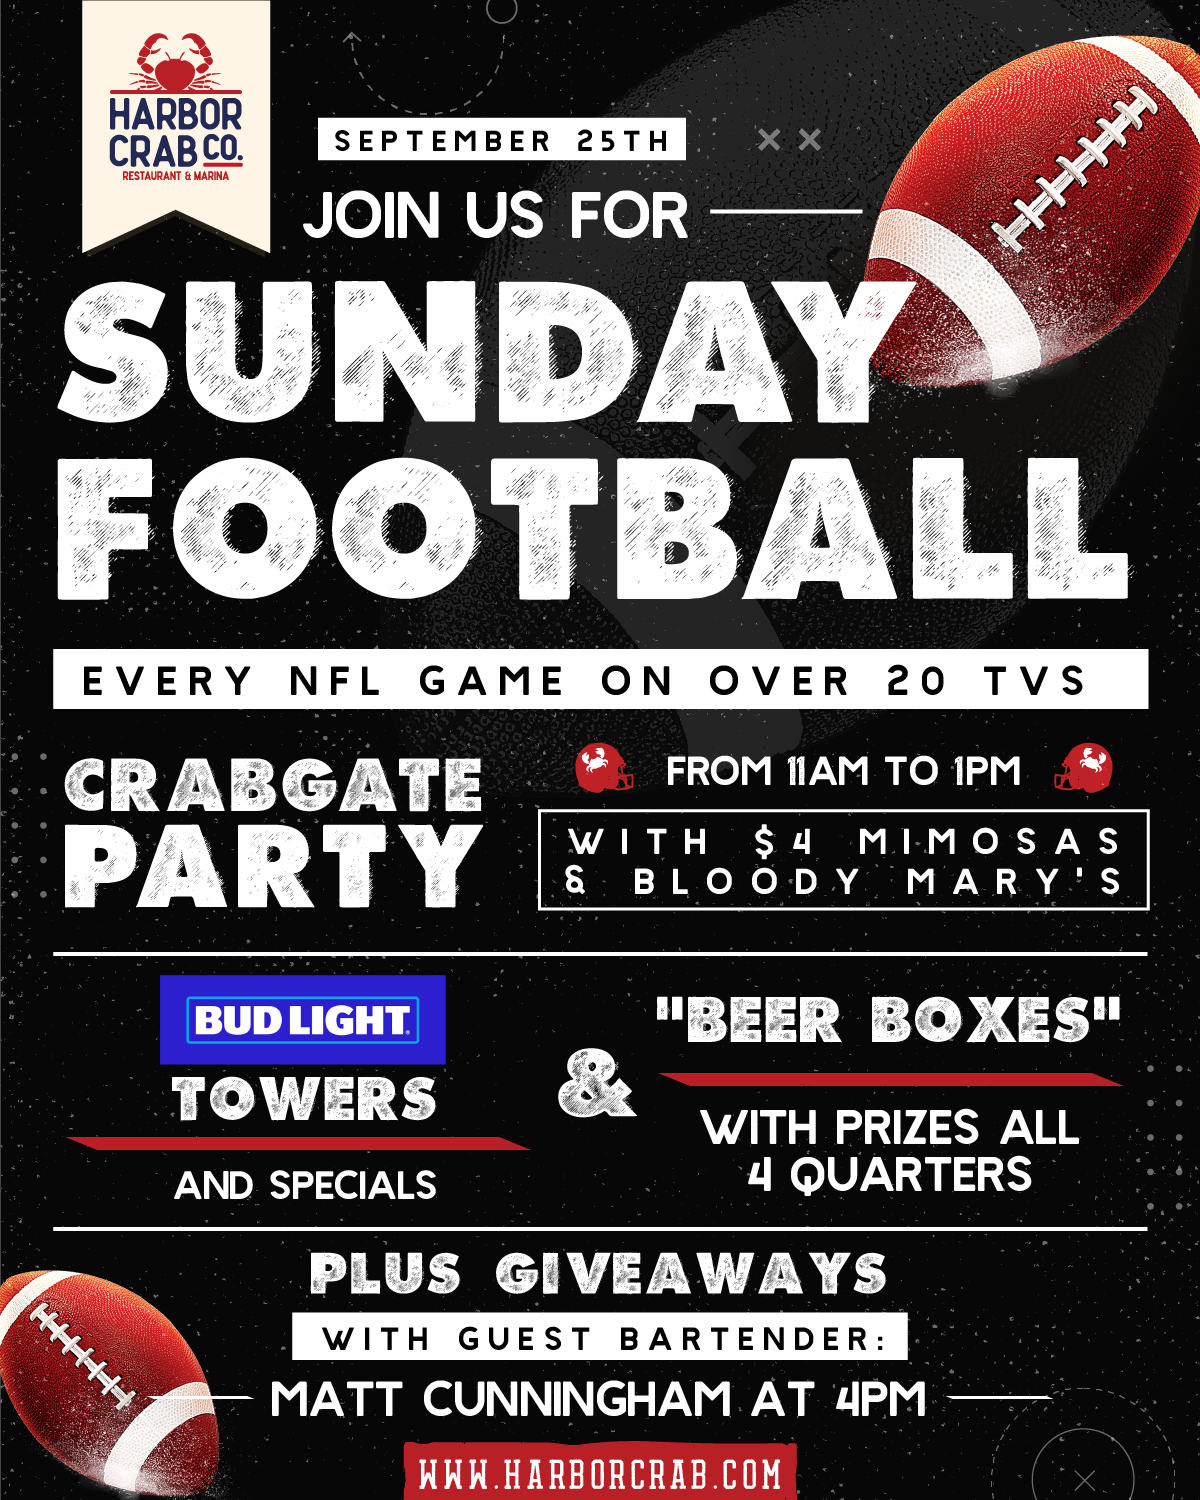 Flyer for Sunday Football on September 25th at Harbor Crab